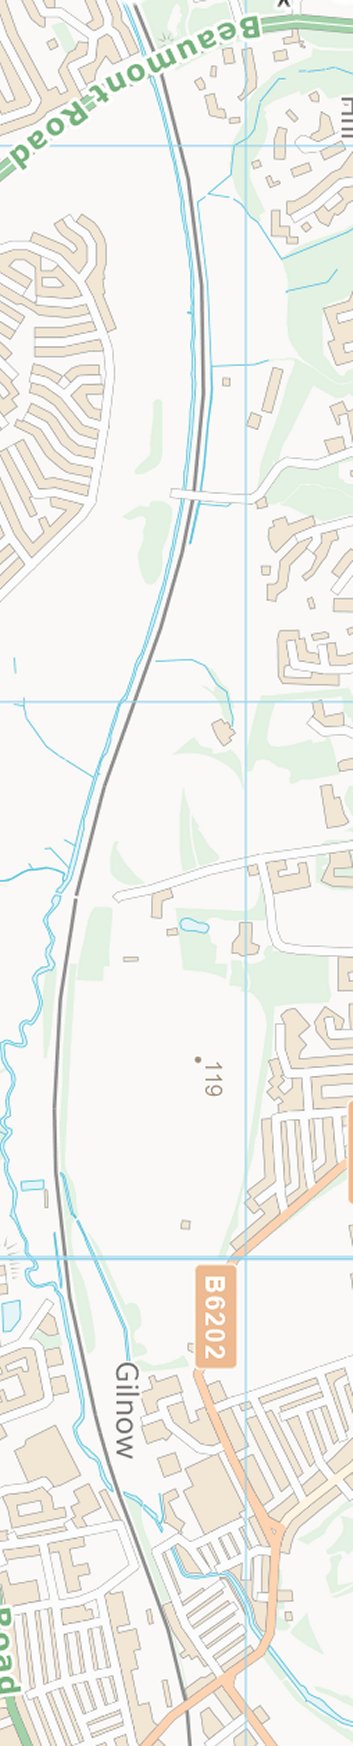 Section from the Ordnance Survey OpenSource mapping 2013 showing L&YR railway line from Lostock to Bolton West.